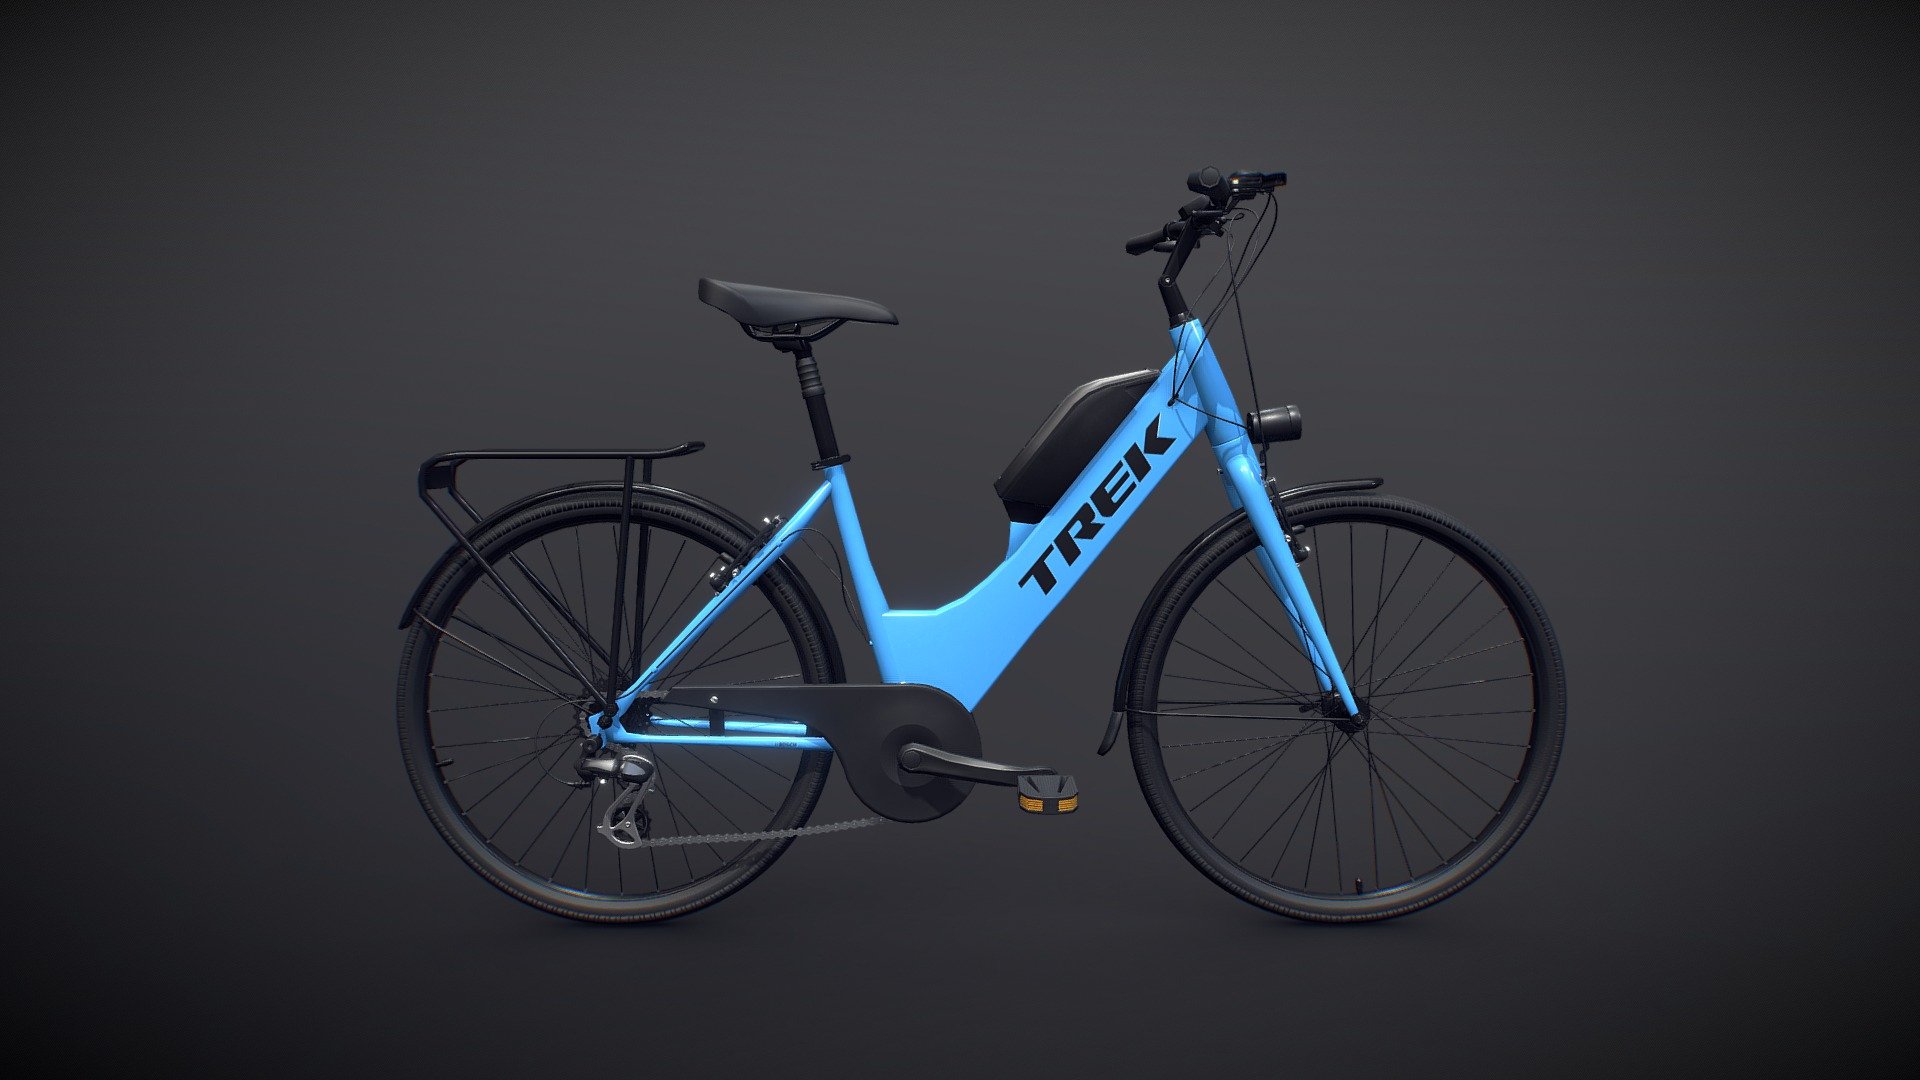 This is a commercial project that I carried out for a client.
For more information, please visit my Artstation page : https://www.artstation.com/artwork/EavD0K - Trek Bike - 3D model by Zakaria (@zak3d) 3d model